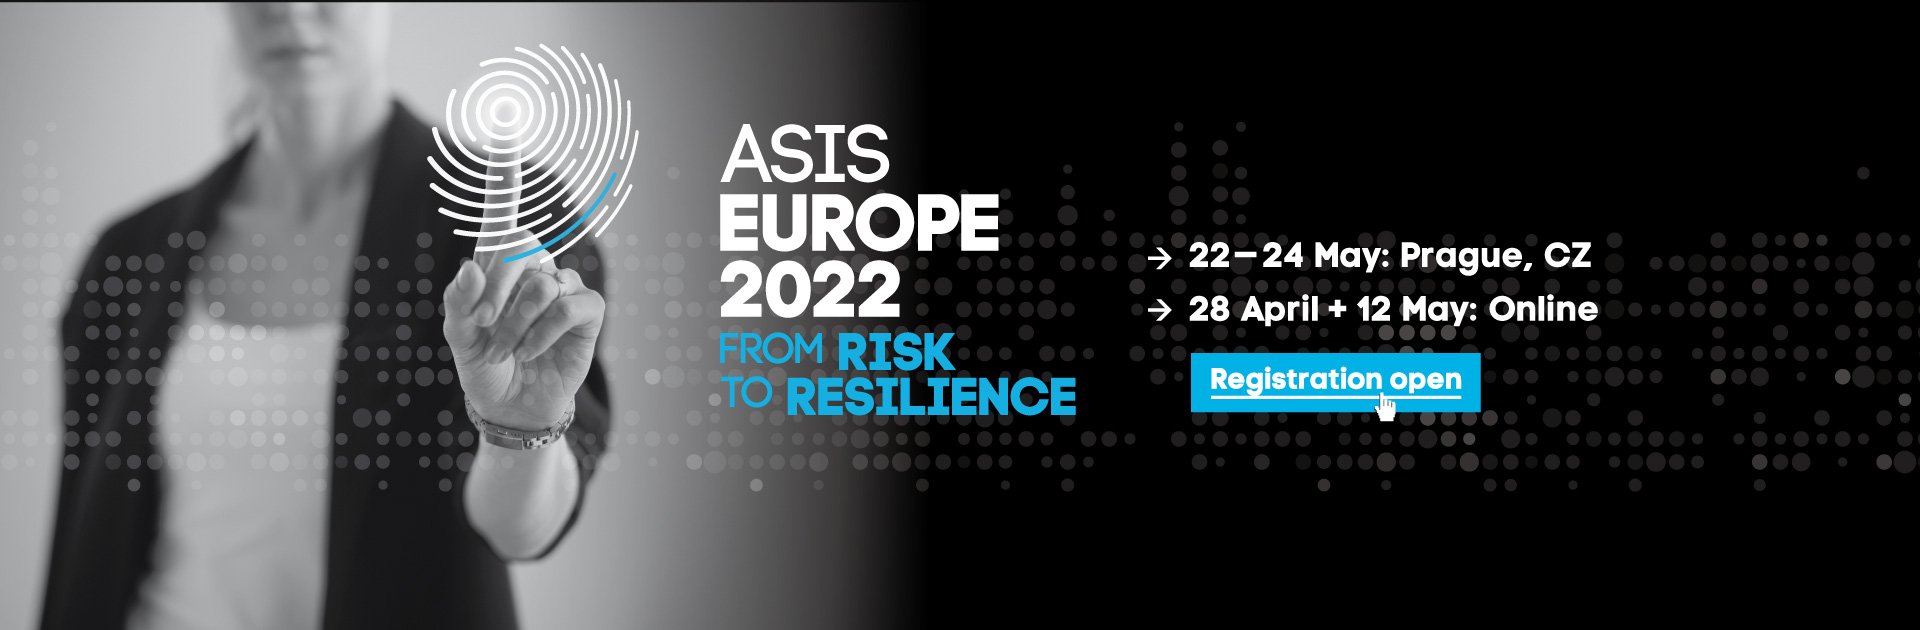 ASIS Europe - 1-3 March 2021